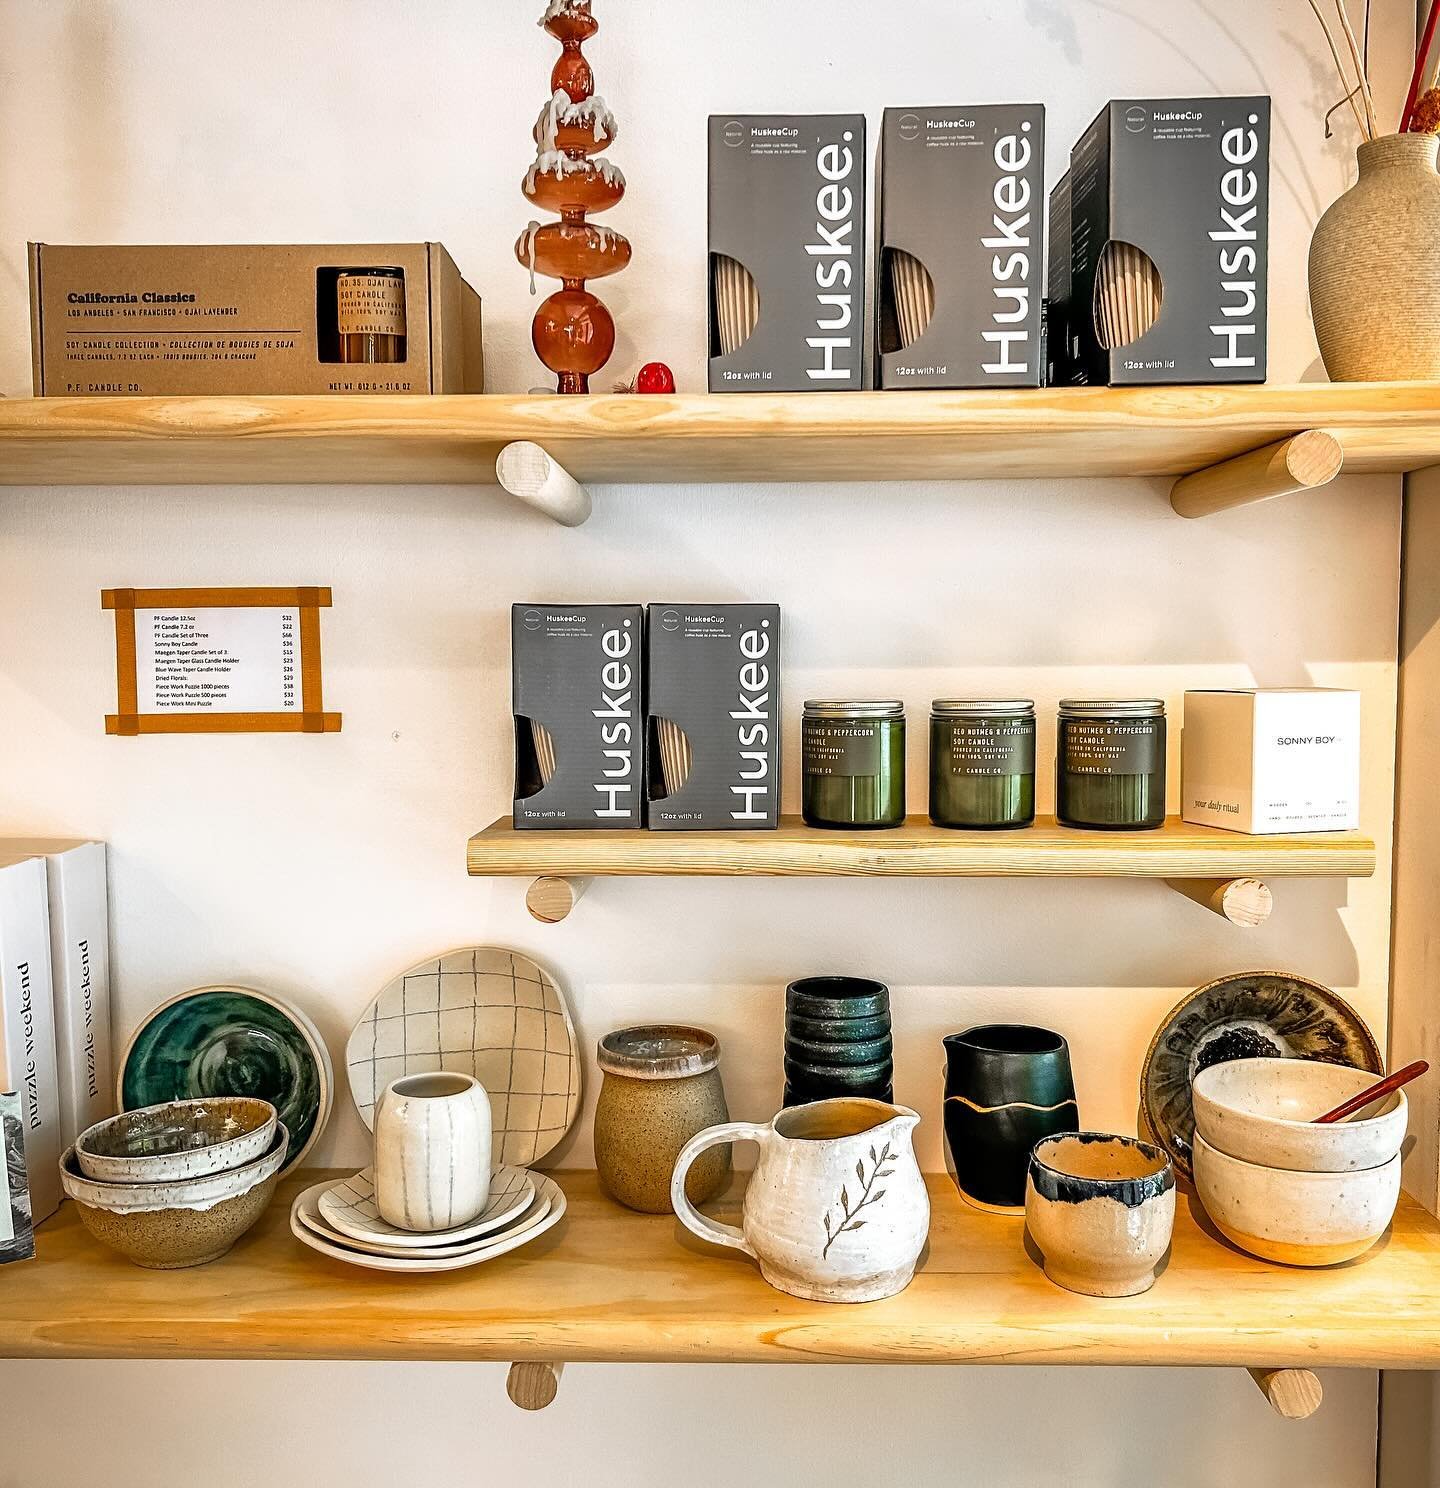 Refresh your collection with the latest @ohtrendyclay pottery now available at @bwekafe North End on Washington St. 

Explore a charming shopping experience filled with artisanal pottery, great coffee and seasonal drinks, and  gifts, handpicked by th